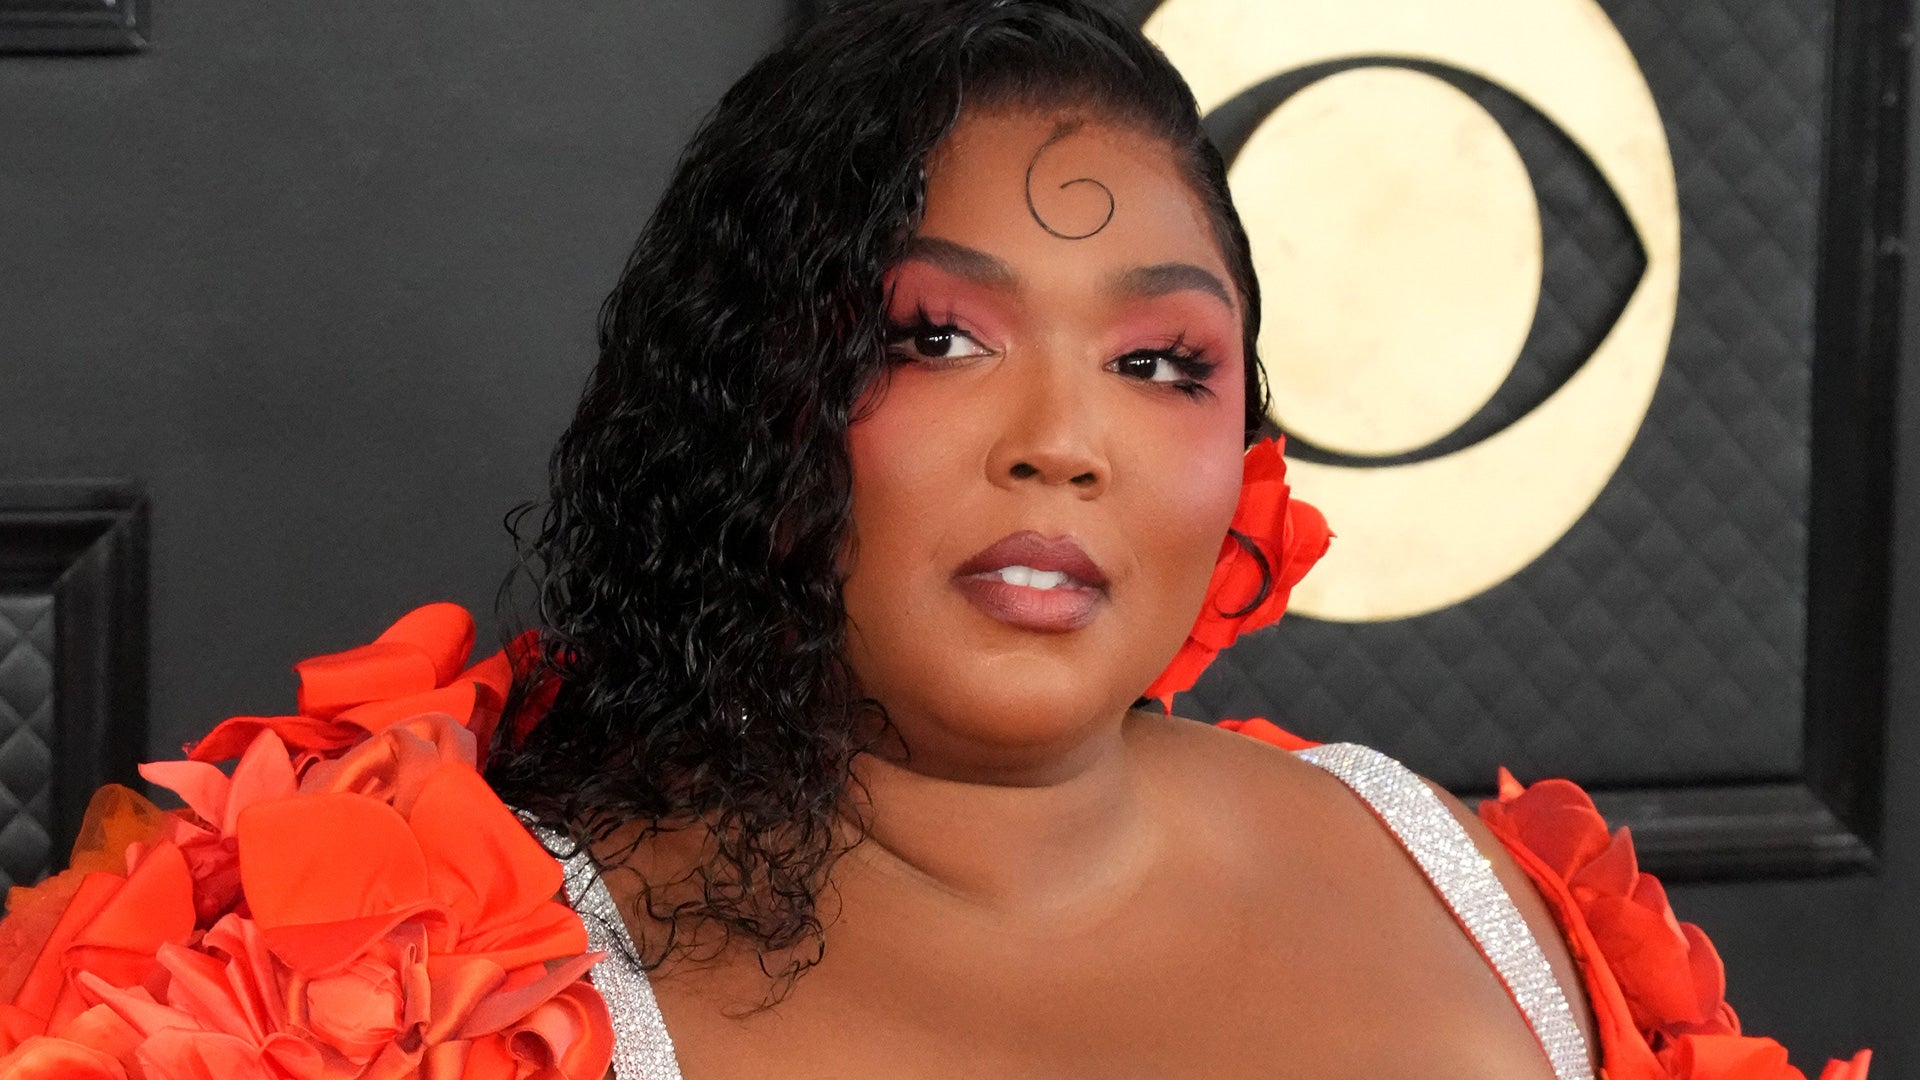 Lizzos Former Dancer Alleges Singer Threatened to Hit Her After She Expressed She Felt Disrespected Entertainment Tonight